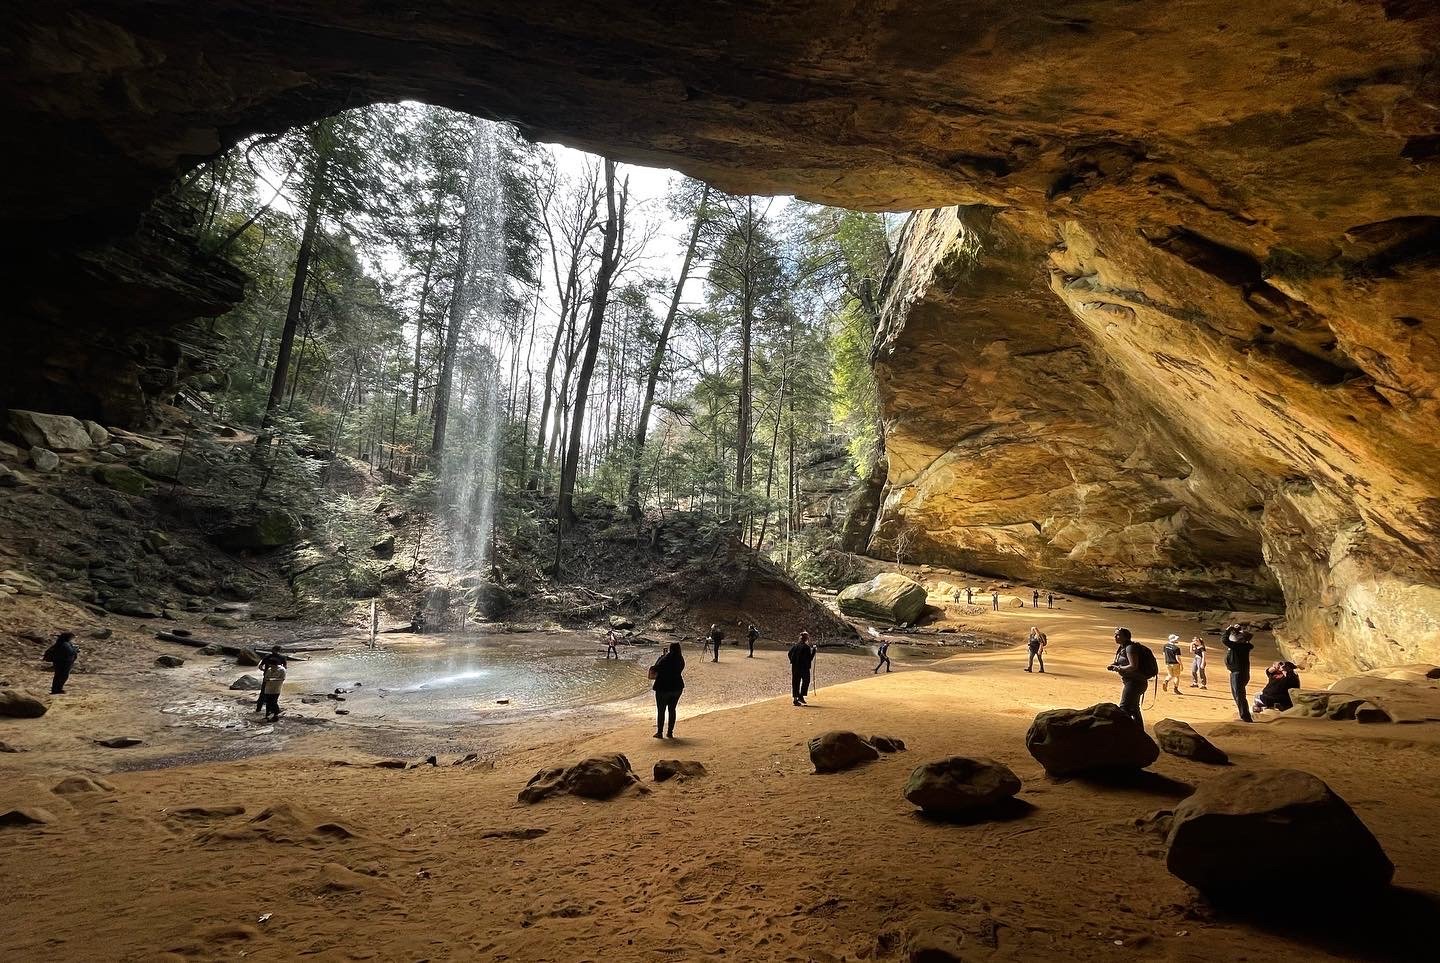  Many things happen during our photography groups: friendships form, self-knowledge deepens, perspectives change, a greater sense of wellbeing is realized, and all of southeast Ohio becomes our personal photography studio. 2022, Ash Cave Field Trip, 